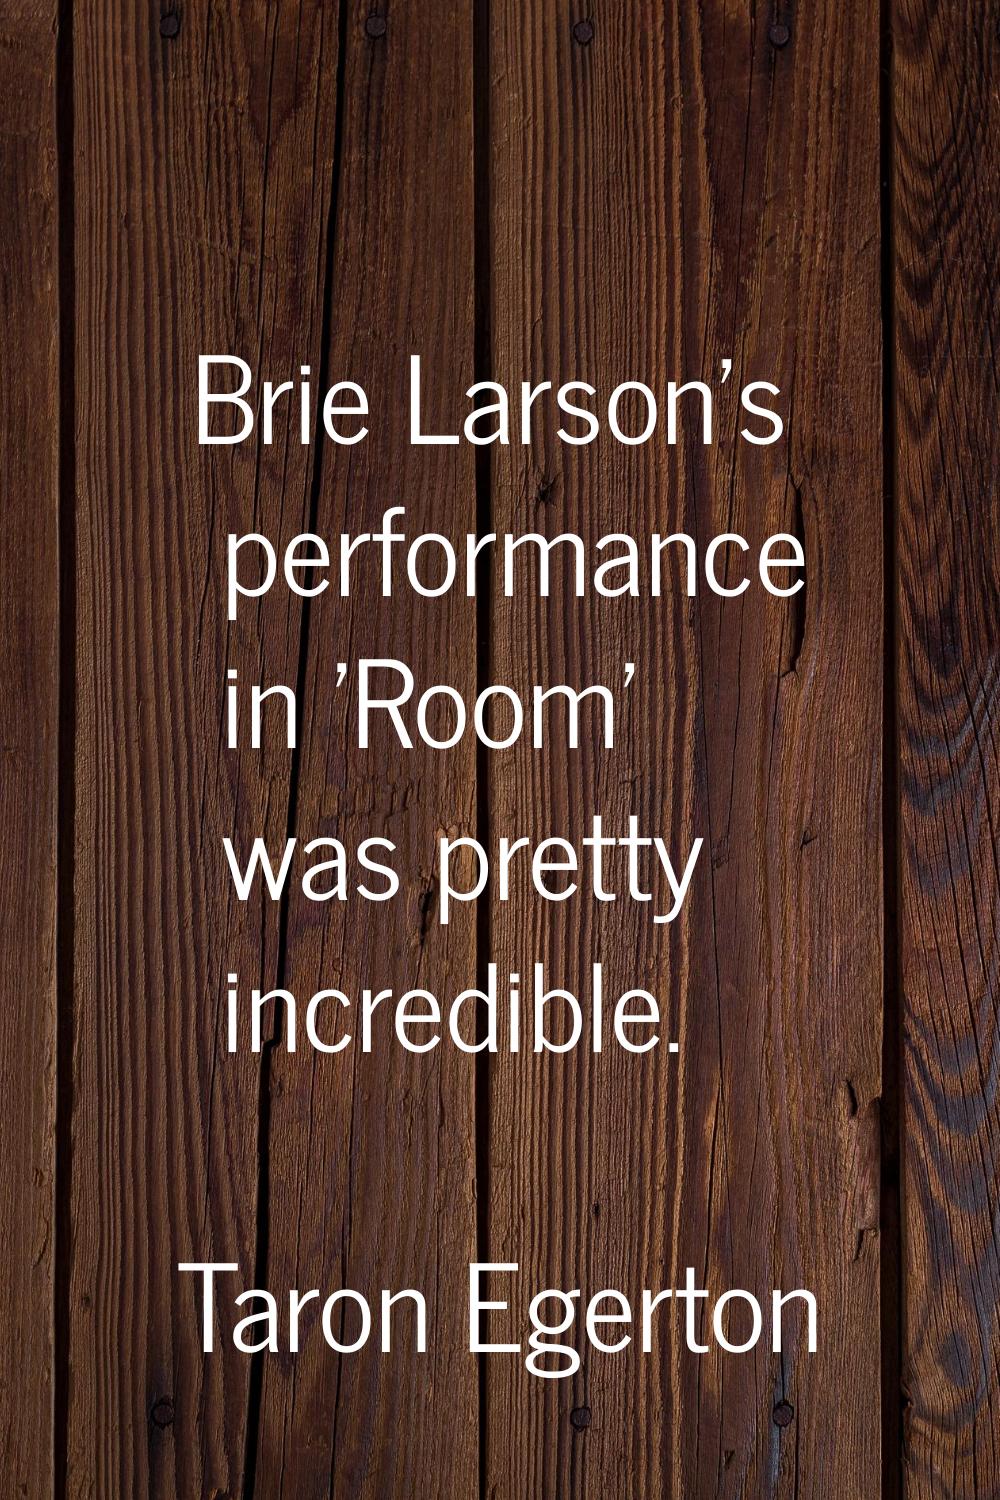 Brie Larson's performance in 'Room' was pretty incredible.